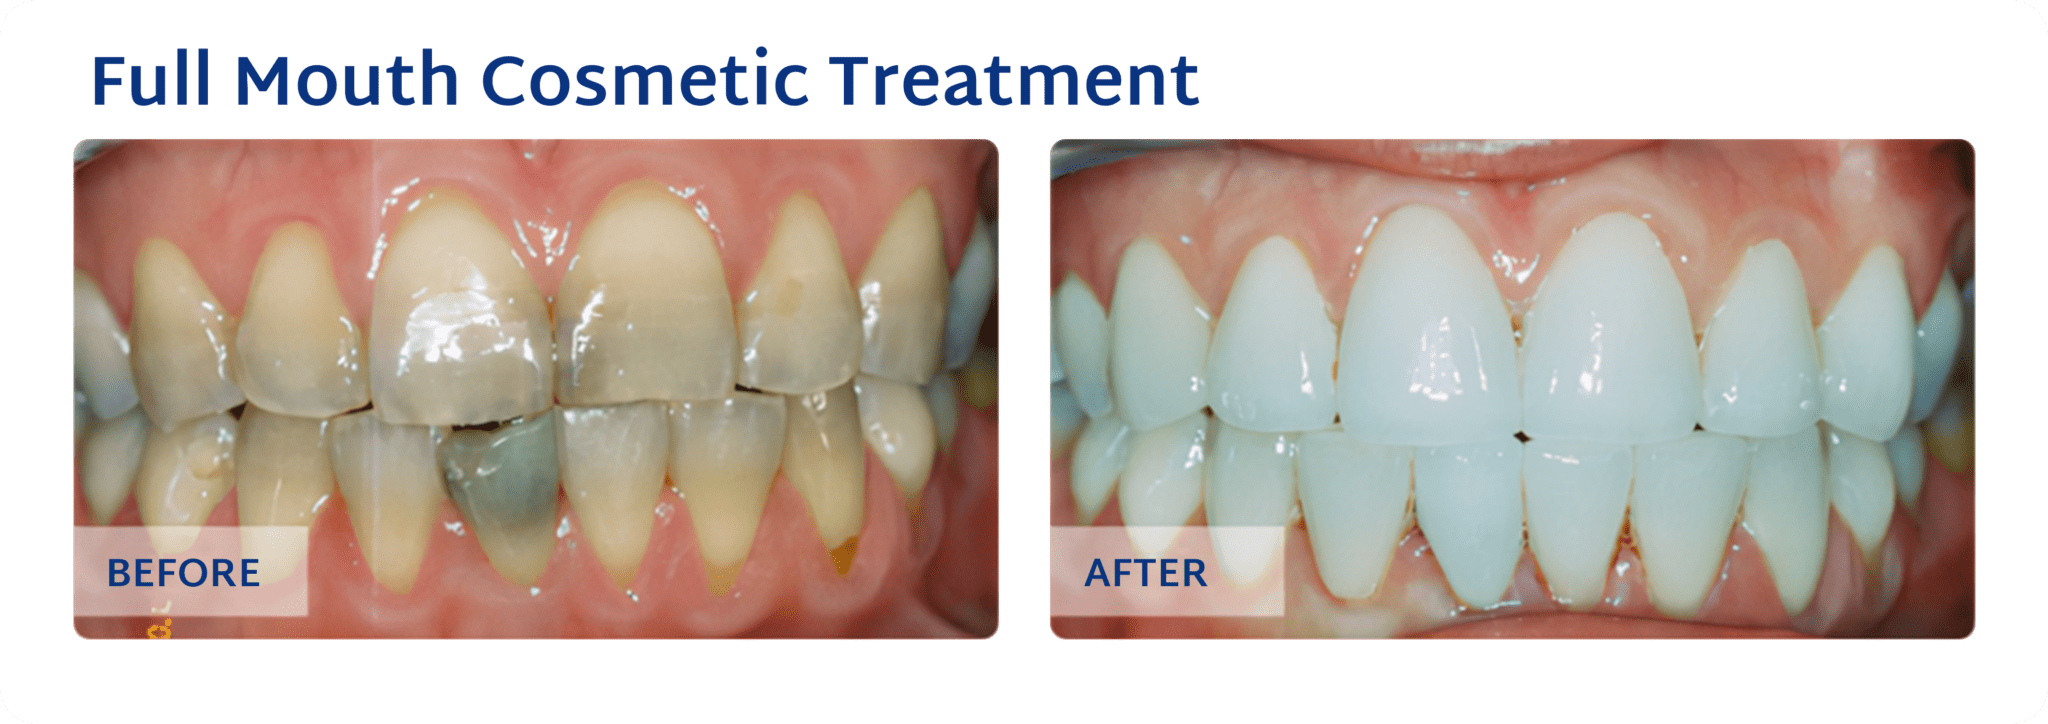 Full Mouth Cosmetic Treatment